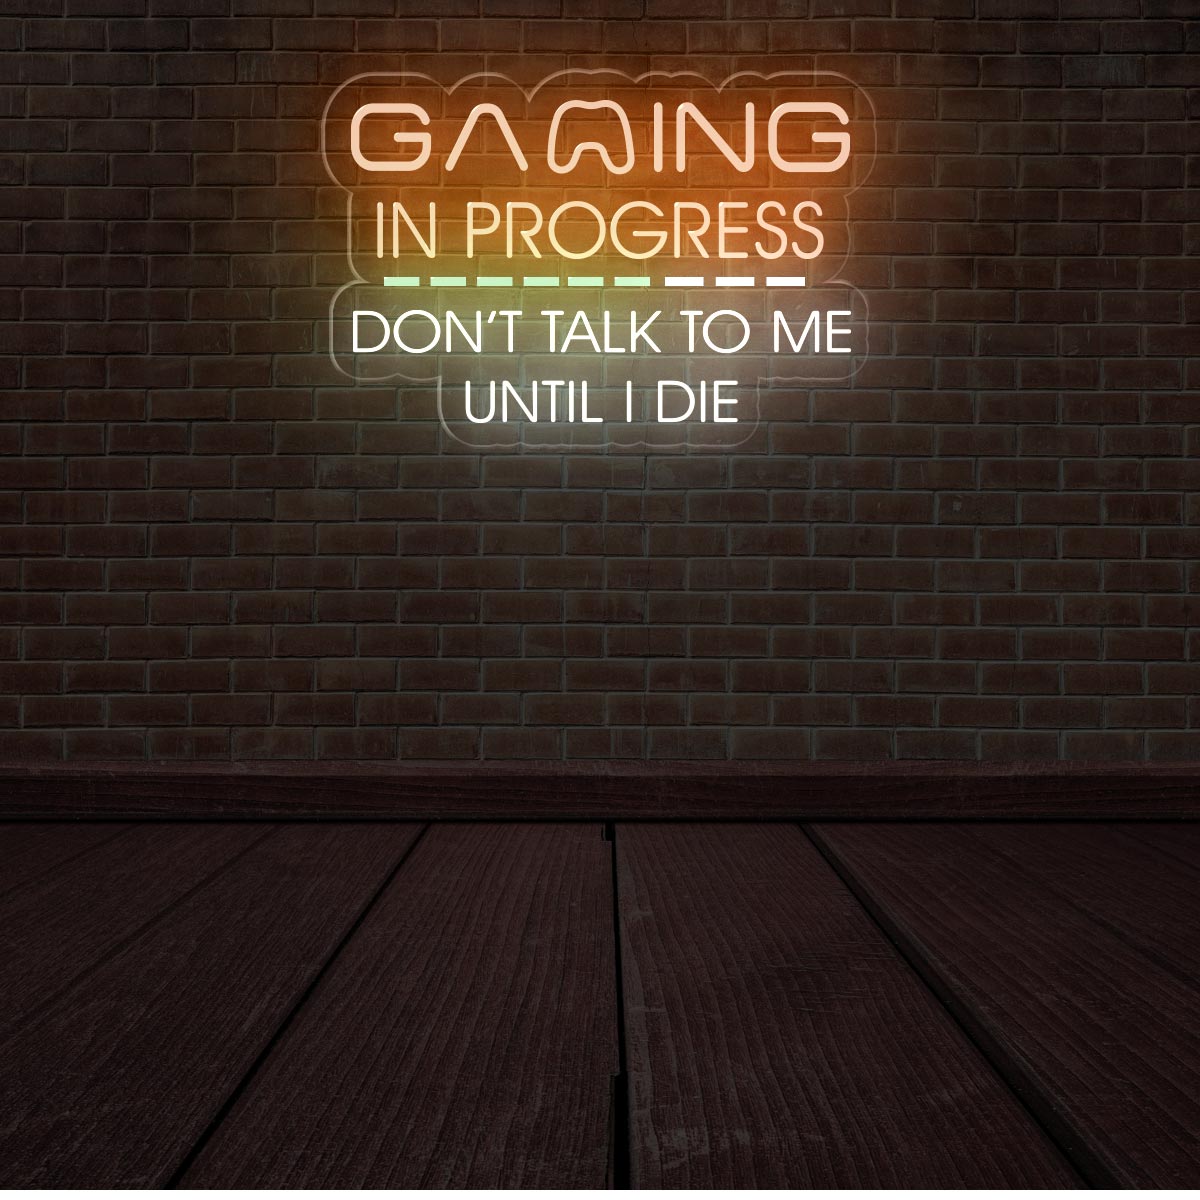 Gaming In Progress. Don't Talk To Me Until I Die - Funny Game Room Sign - NEONXPERT